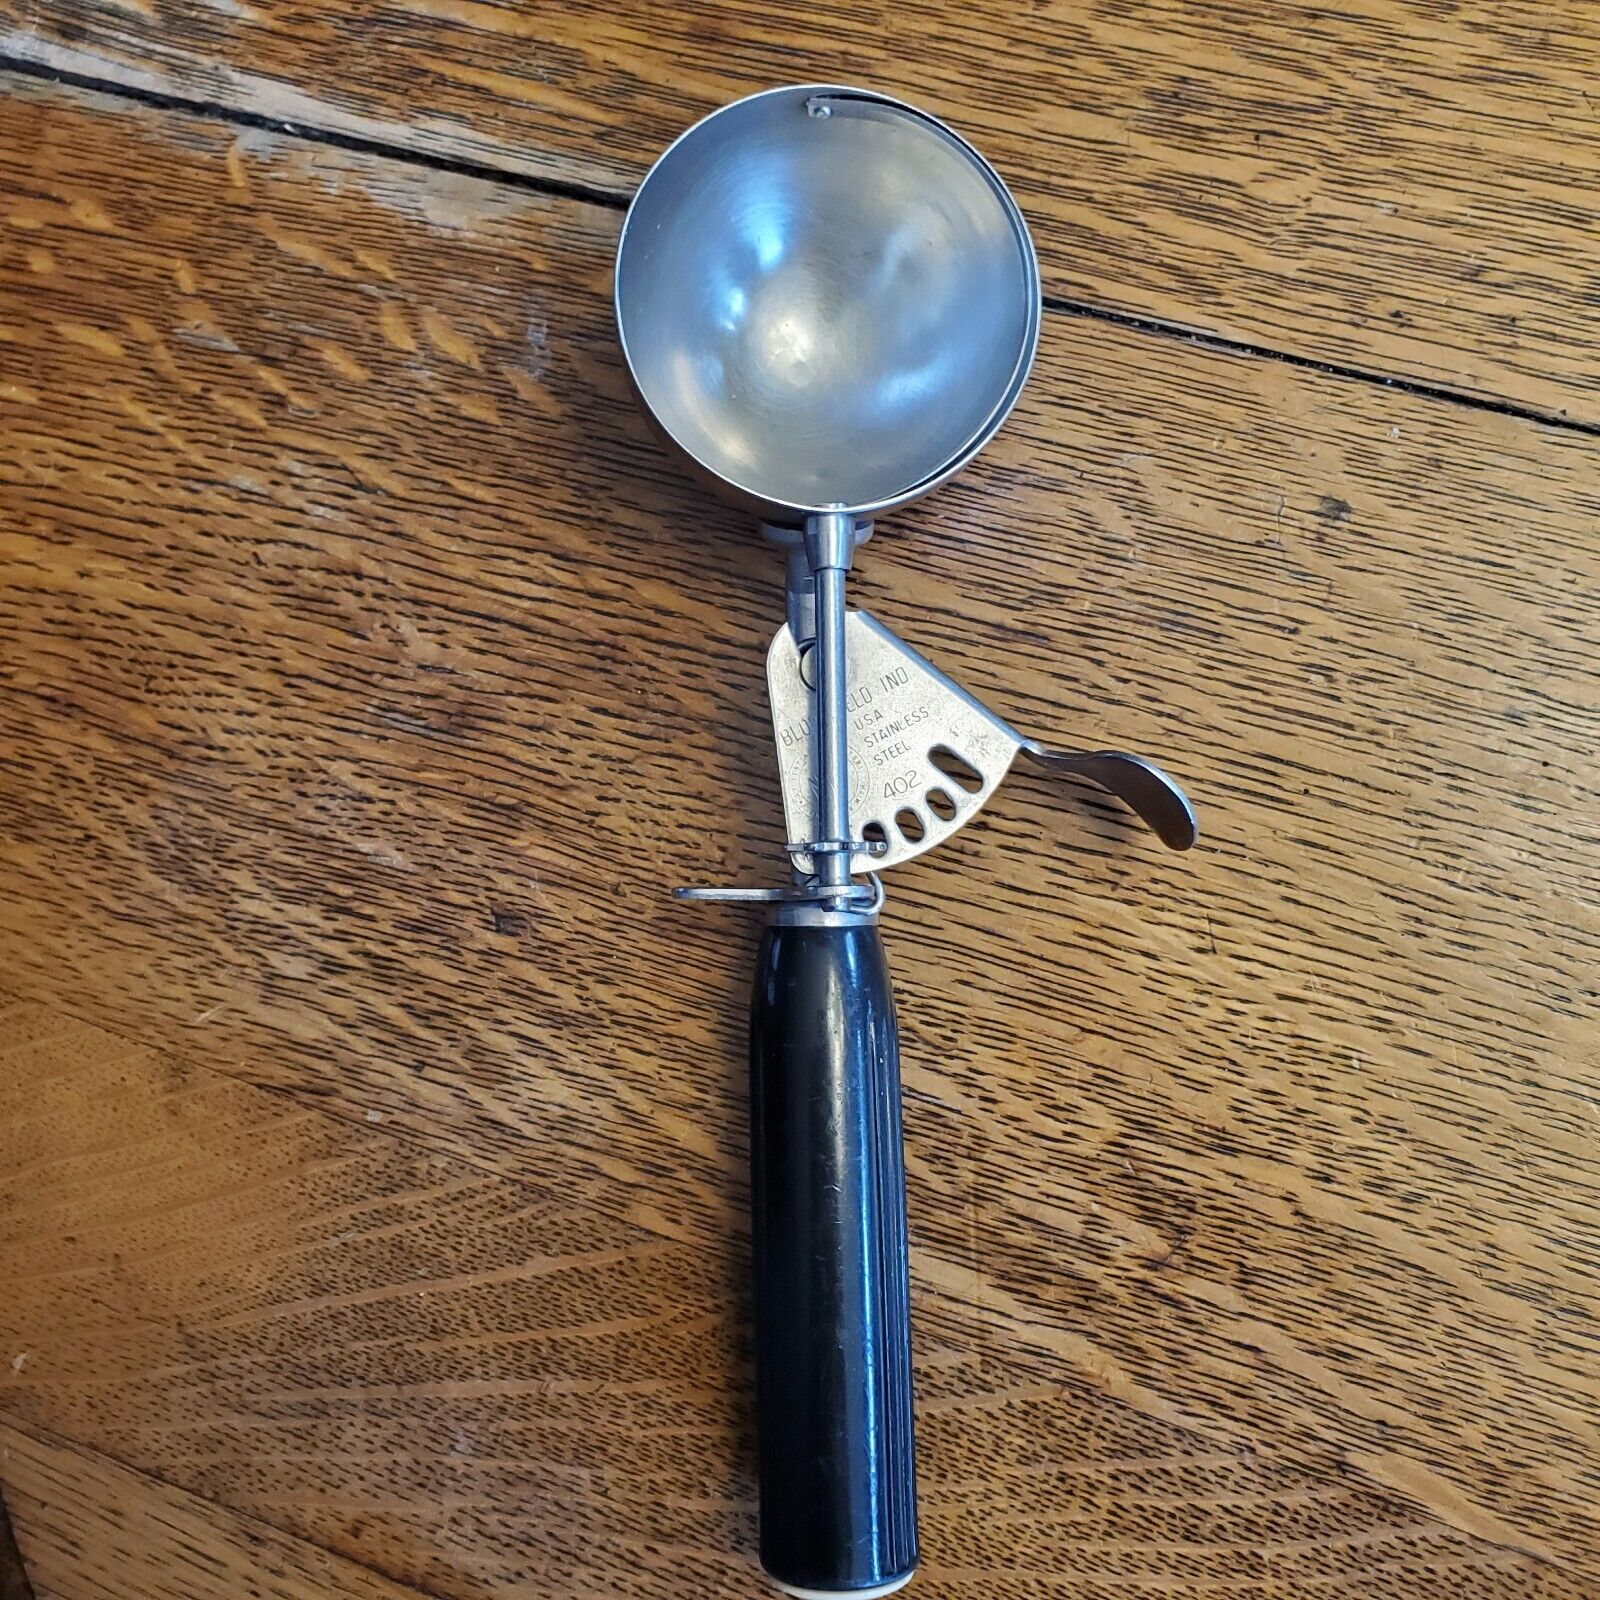 1960s Bloomfield Industries Ice Cream Scoop Vintage Model 402 Made in the USA